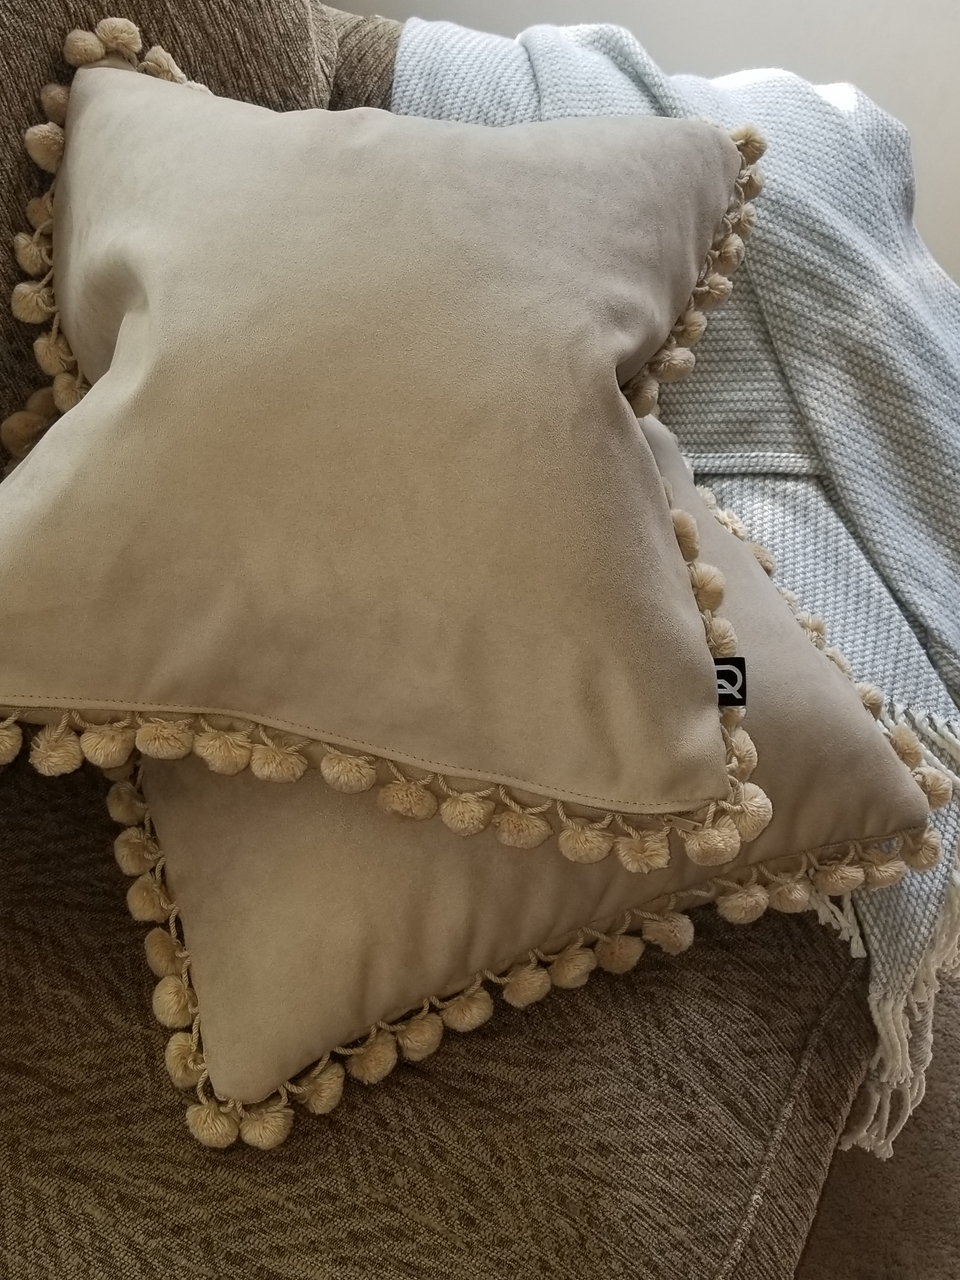 taupe velour fabric pillow covers with matching fur pom pom fringe trim on tan couch stacked